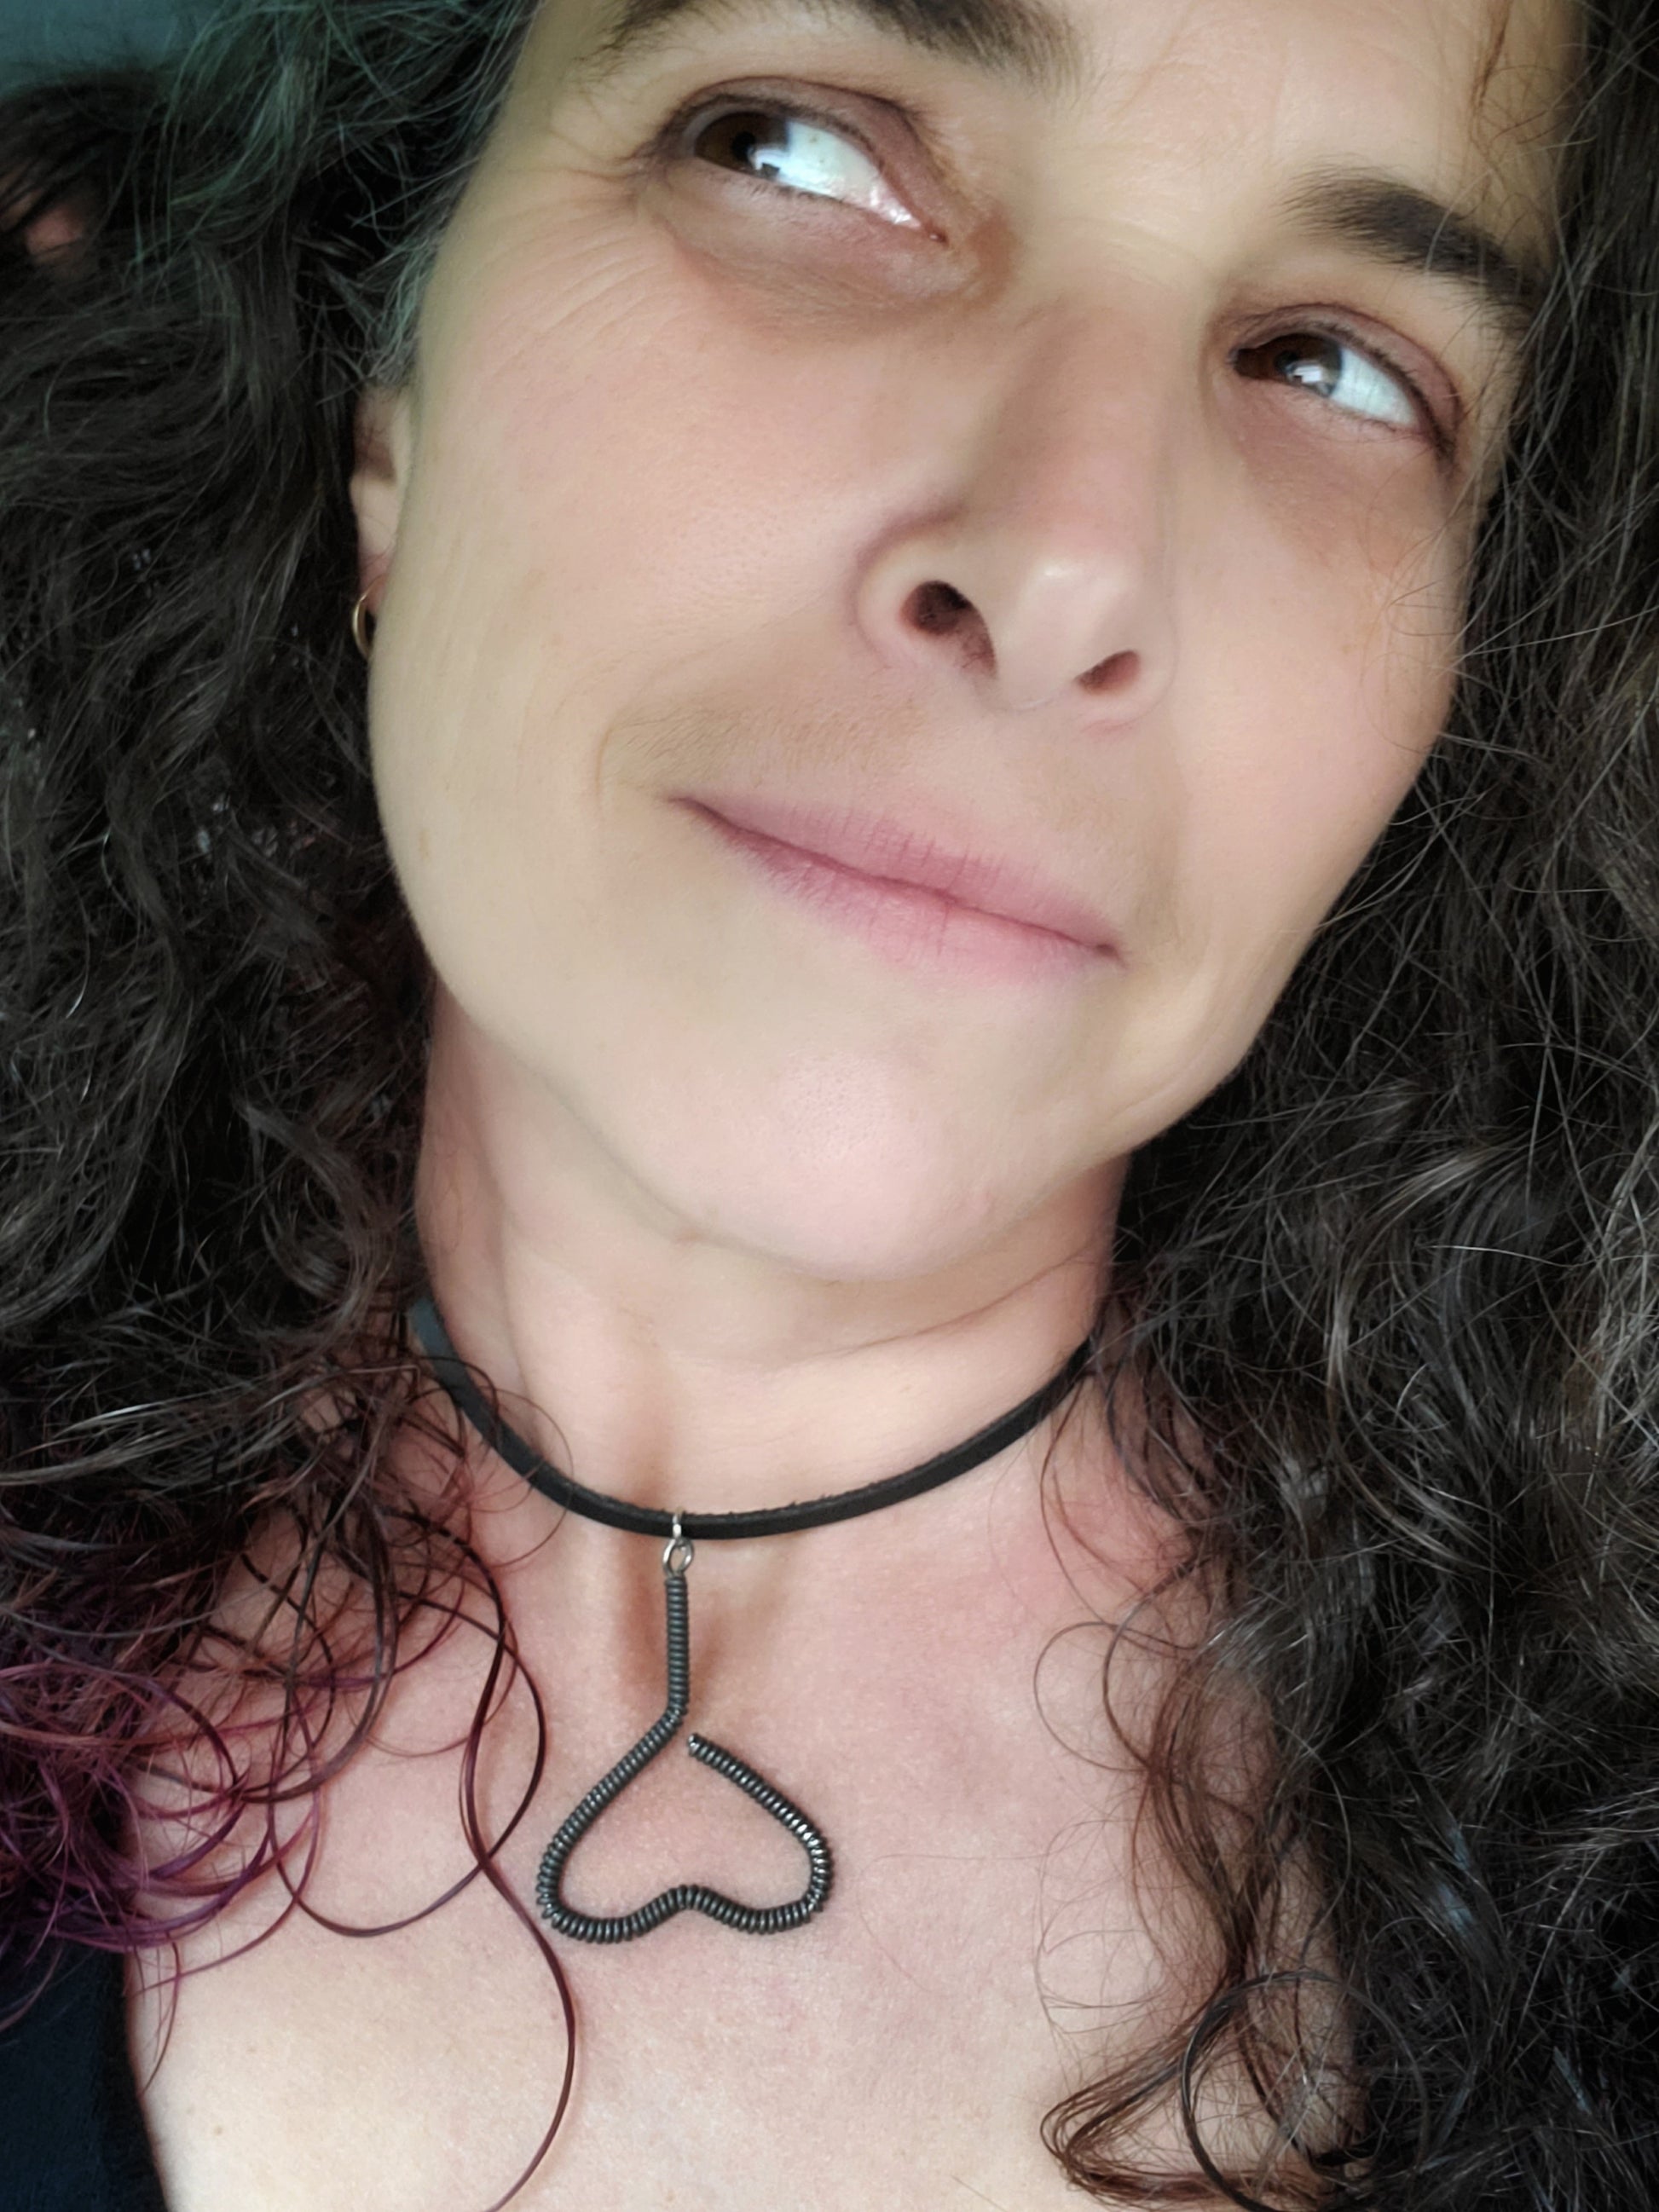 woman's head with black, grey and purple hair - she is wearing a necklace - pendant is in the shape of an upside down heart and is made from a black upcycled piano string - pendant hangs off a black leather cord